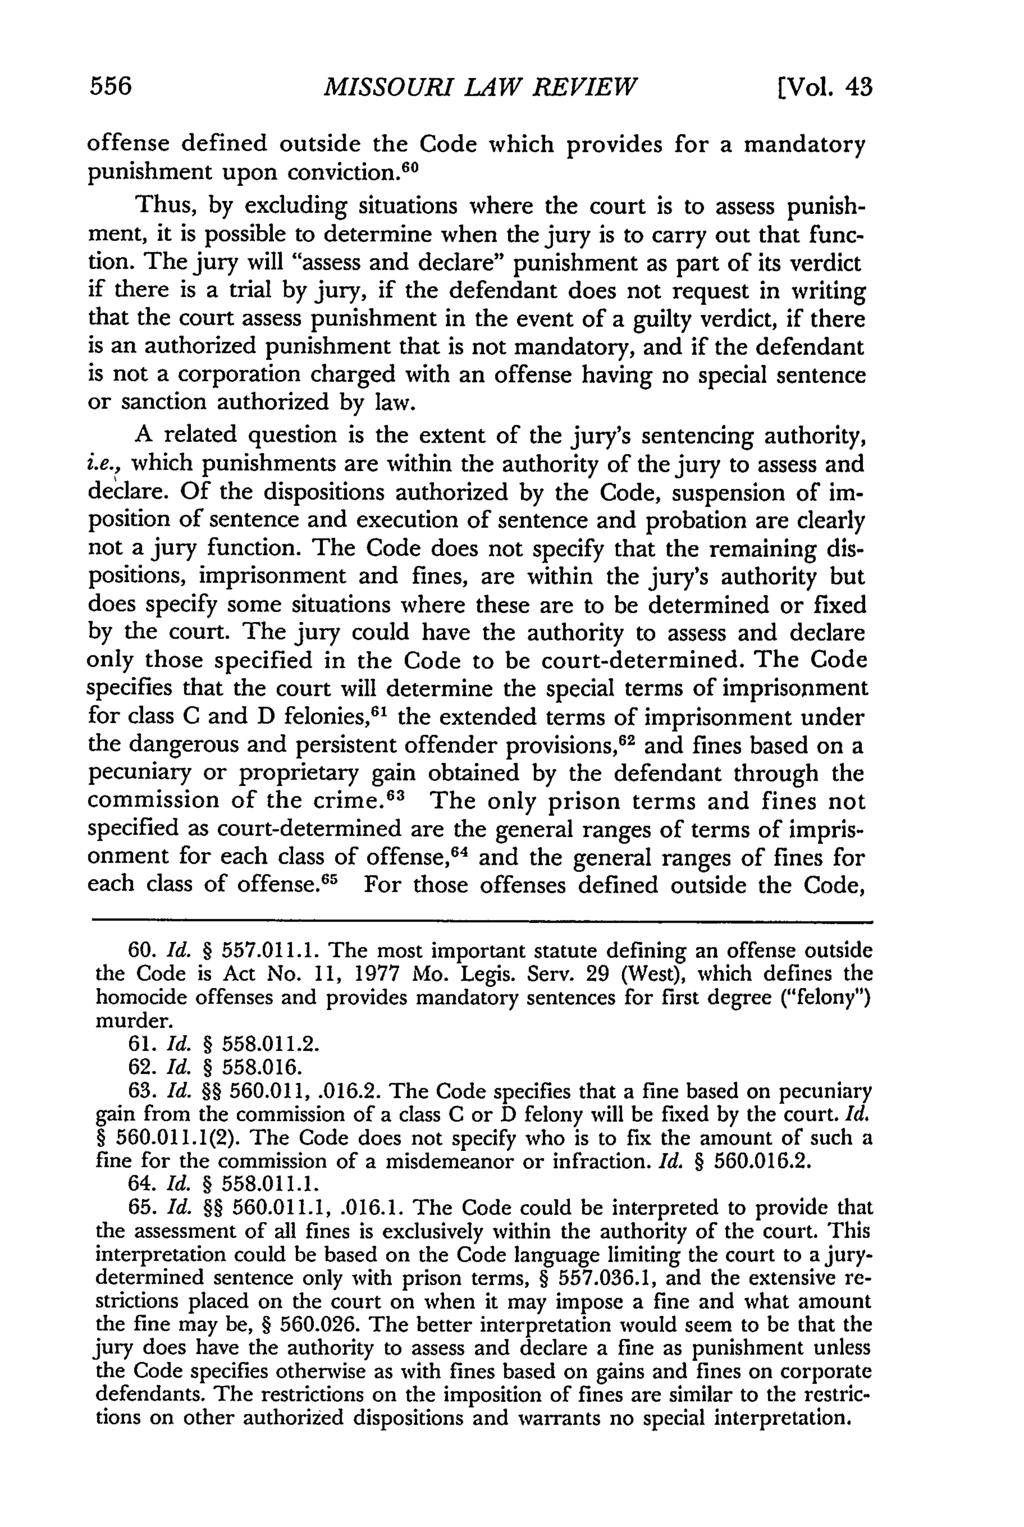 556 Missouri Law Review, Vol. 43, Iss. 3 [1978], Art. 6 MISSOURI LAW REVIEW [Vol. 43 offense defined outside the Code which provides for a mandatory punishment upon conviction.